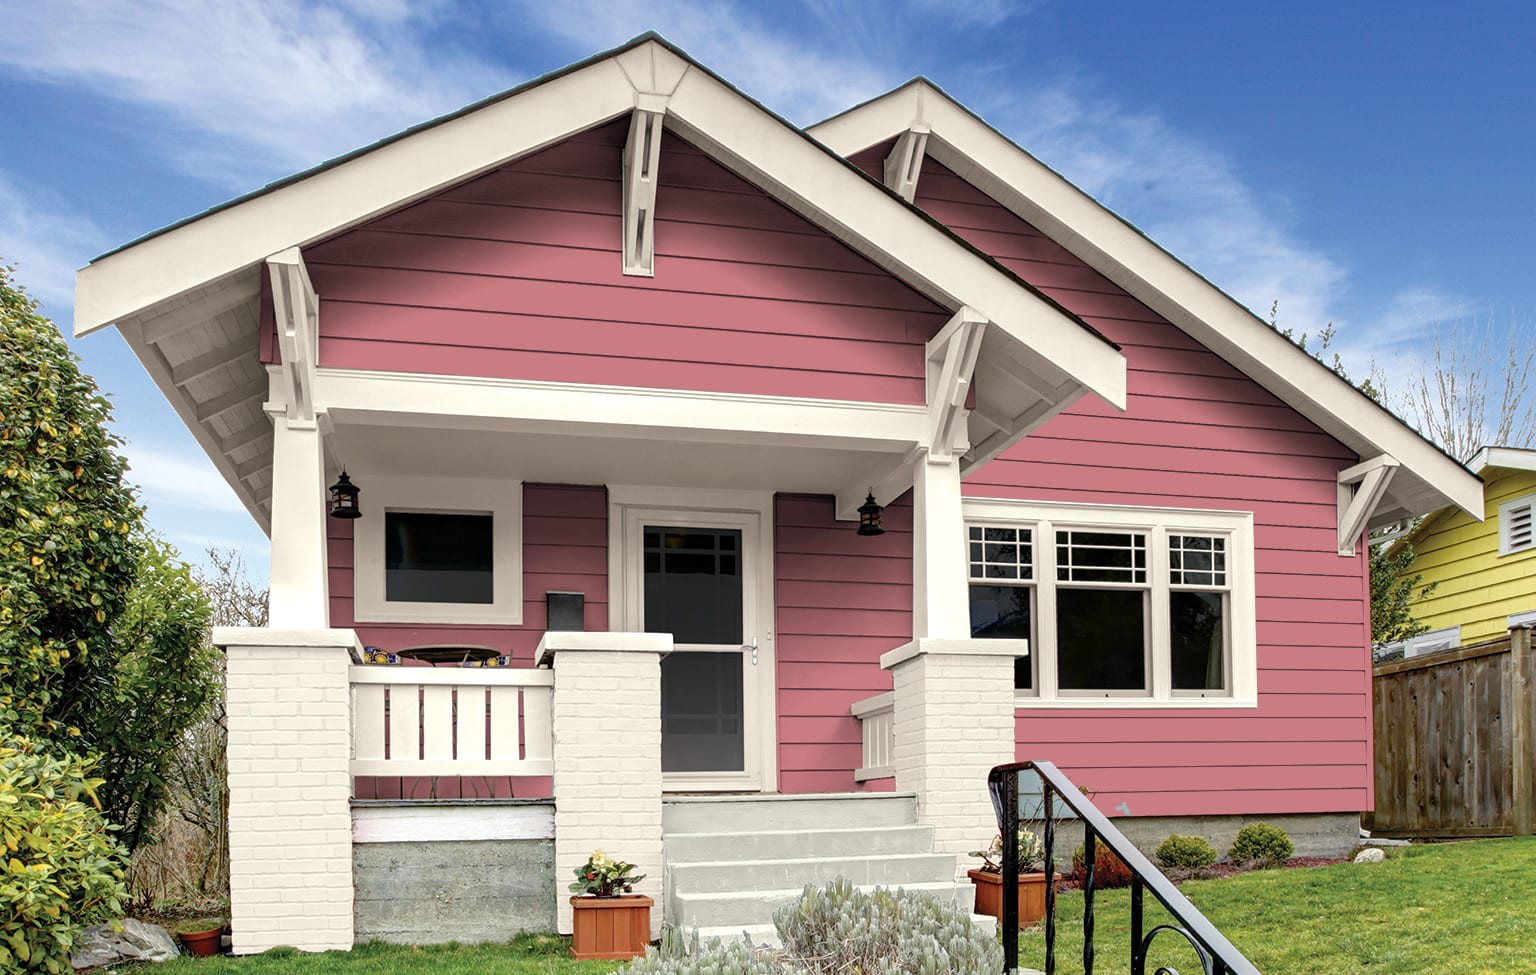 How often should you Paint the Exterior of your home